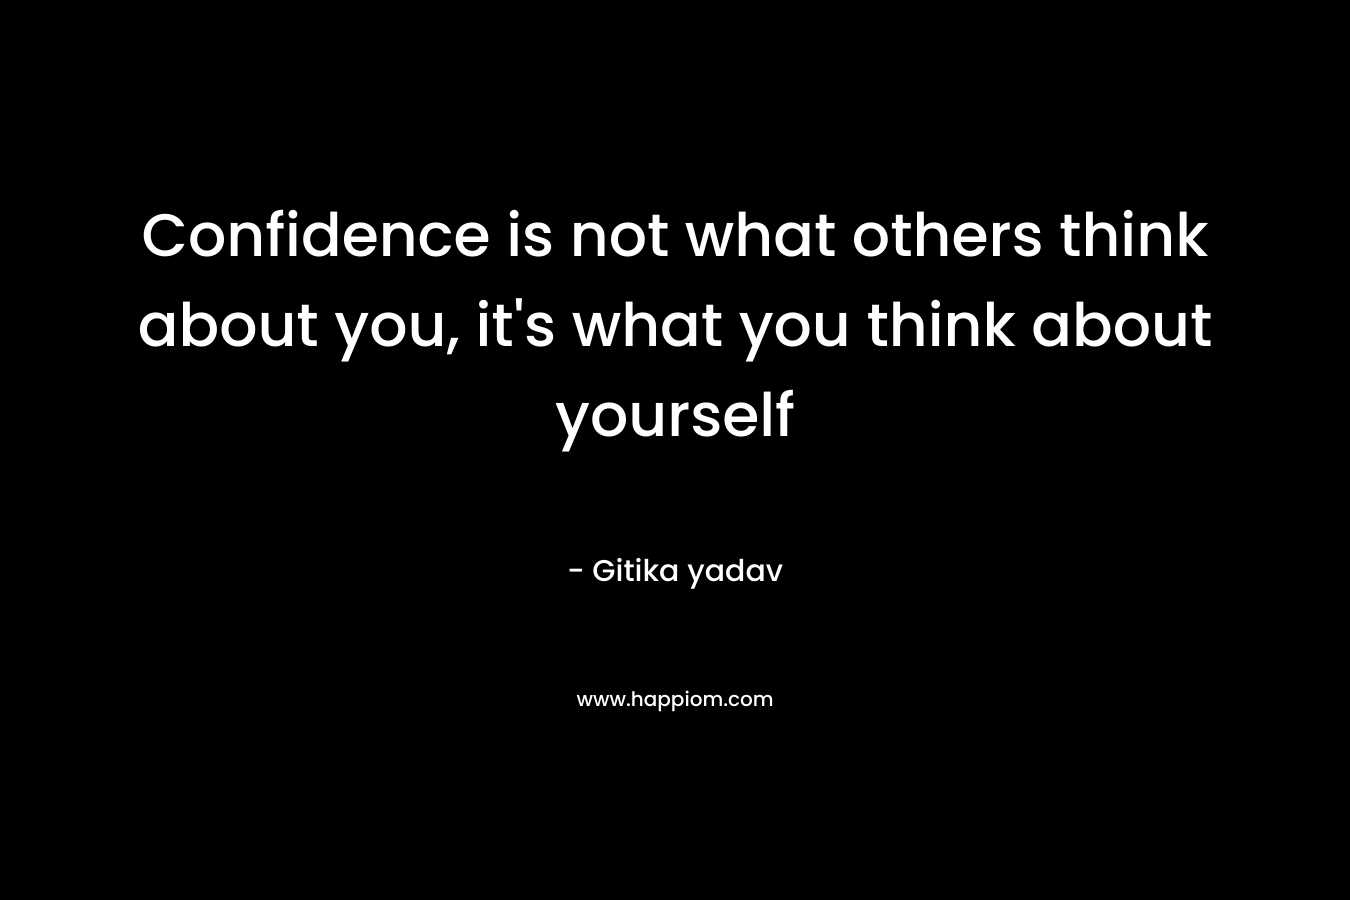 Confidence is not what others think about you, it's what you think about yourself